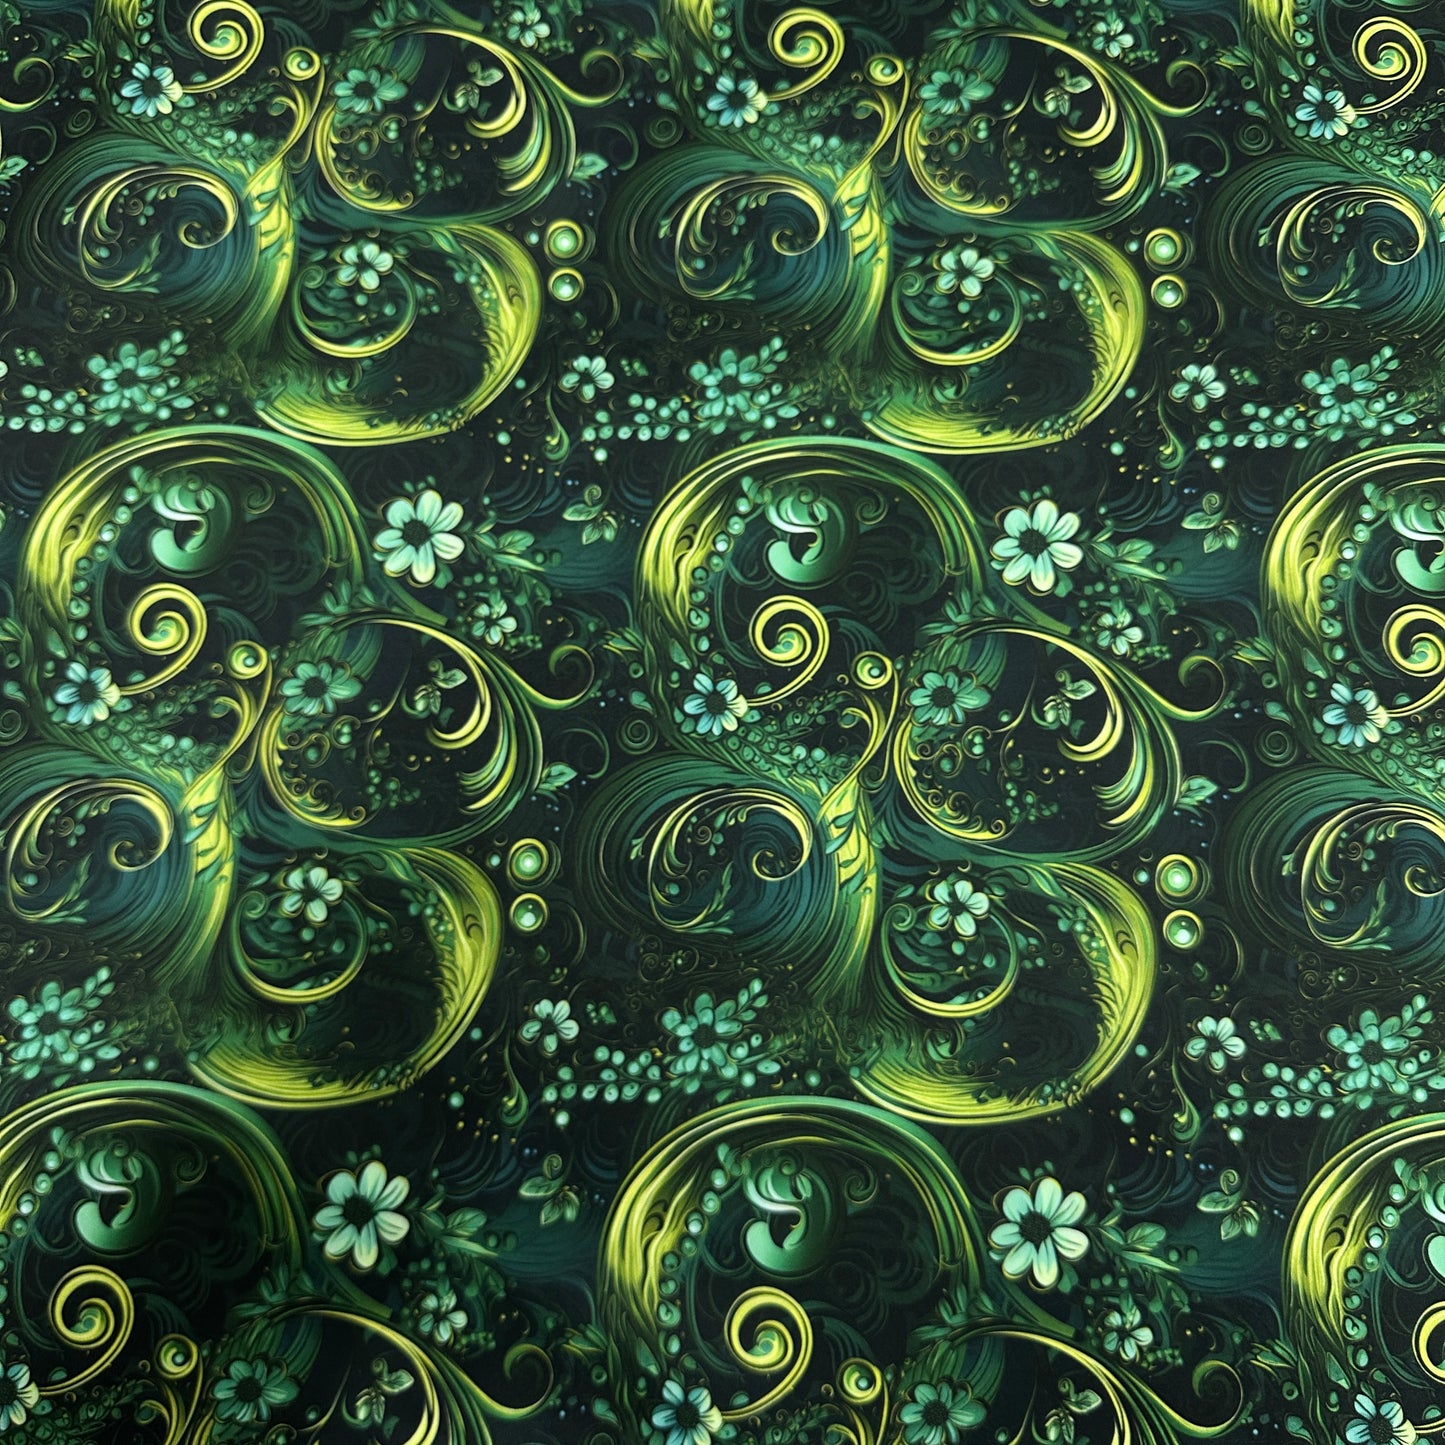 Green Flowery Swirls 1 mil PUL Fabric - Made in the USA